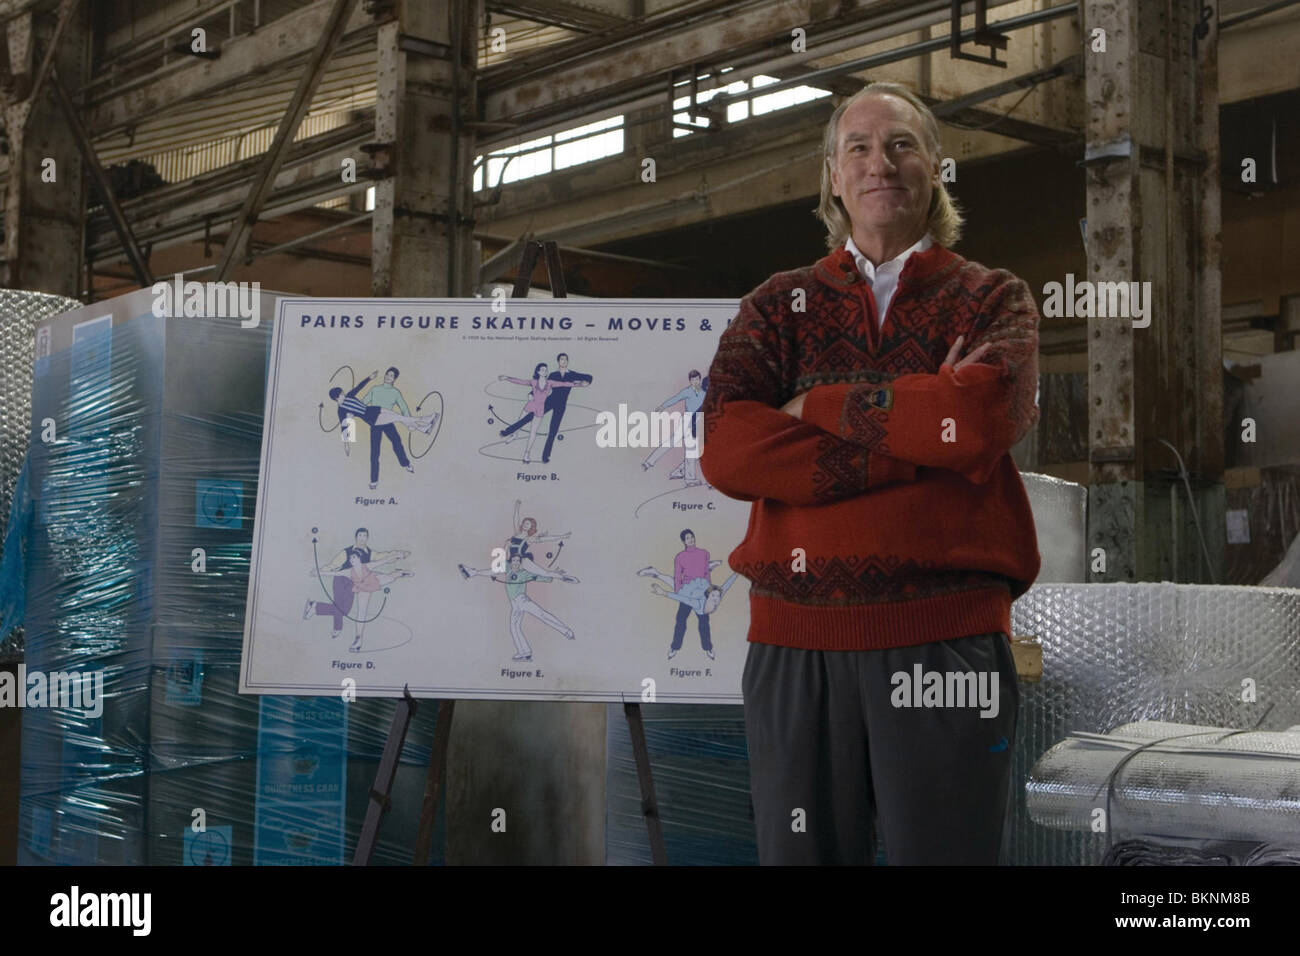 BLADES OF GLORY (2007) CRAIG T NELSON BGLO 001-11 Banque D'Images